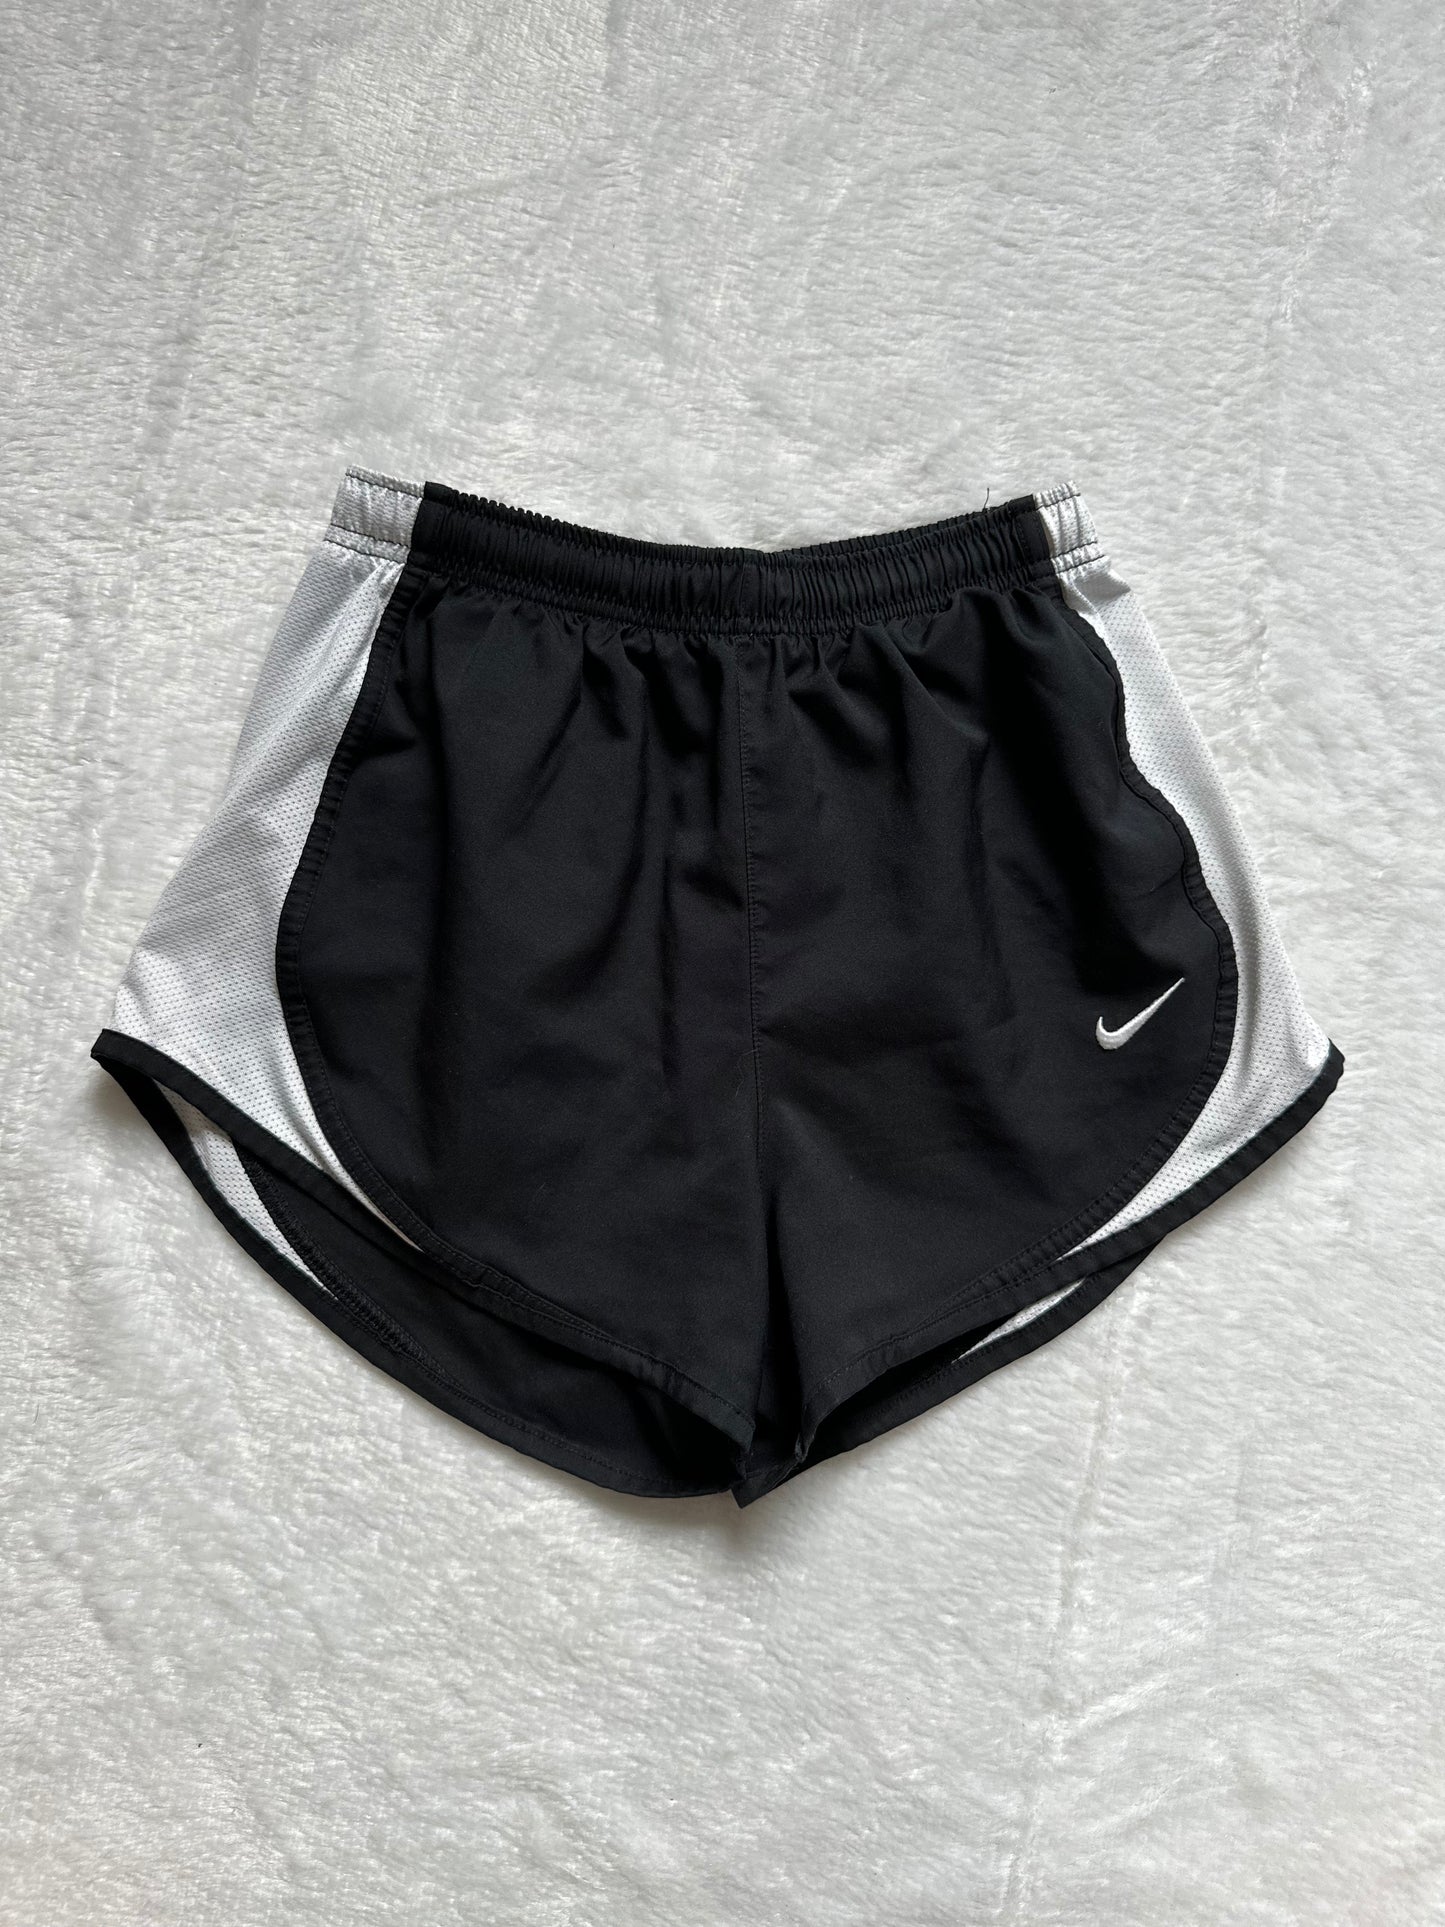 Nike Dry Fit Running Shorts